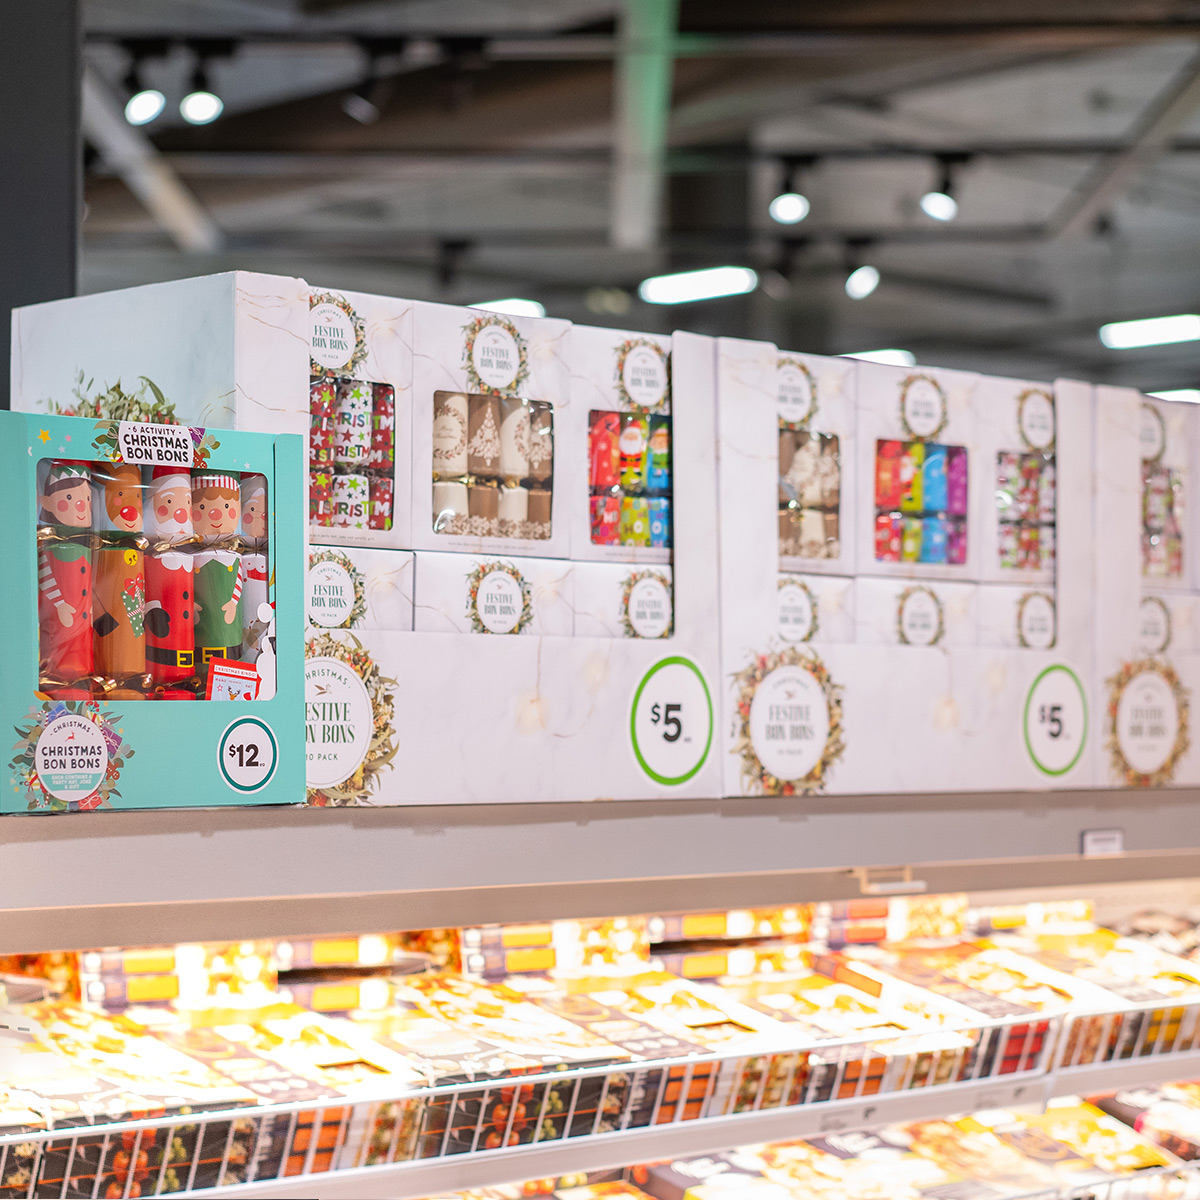 woolworths-boxer-and-co-design-agency-packaging